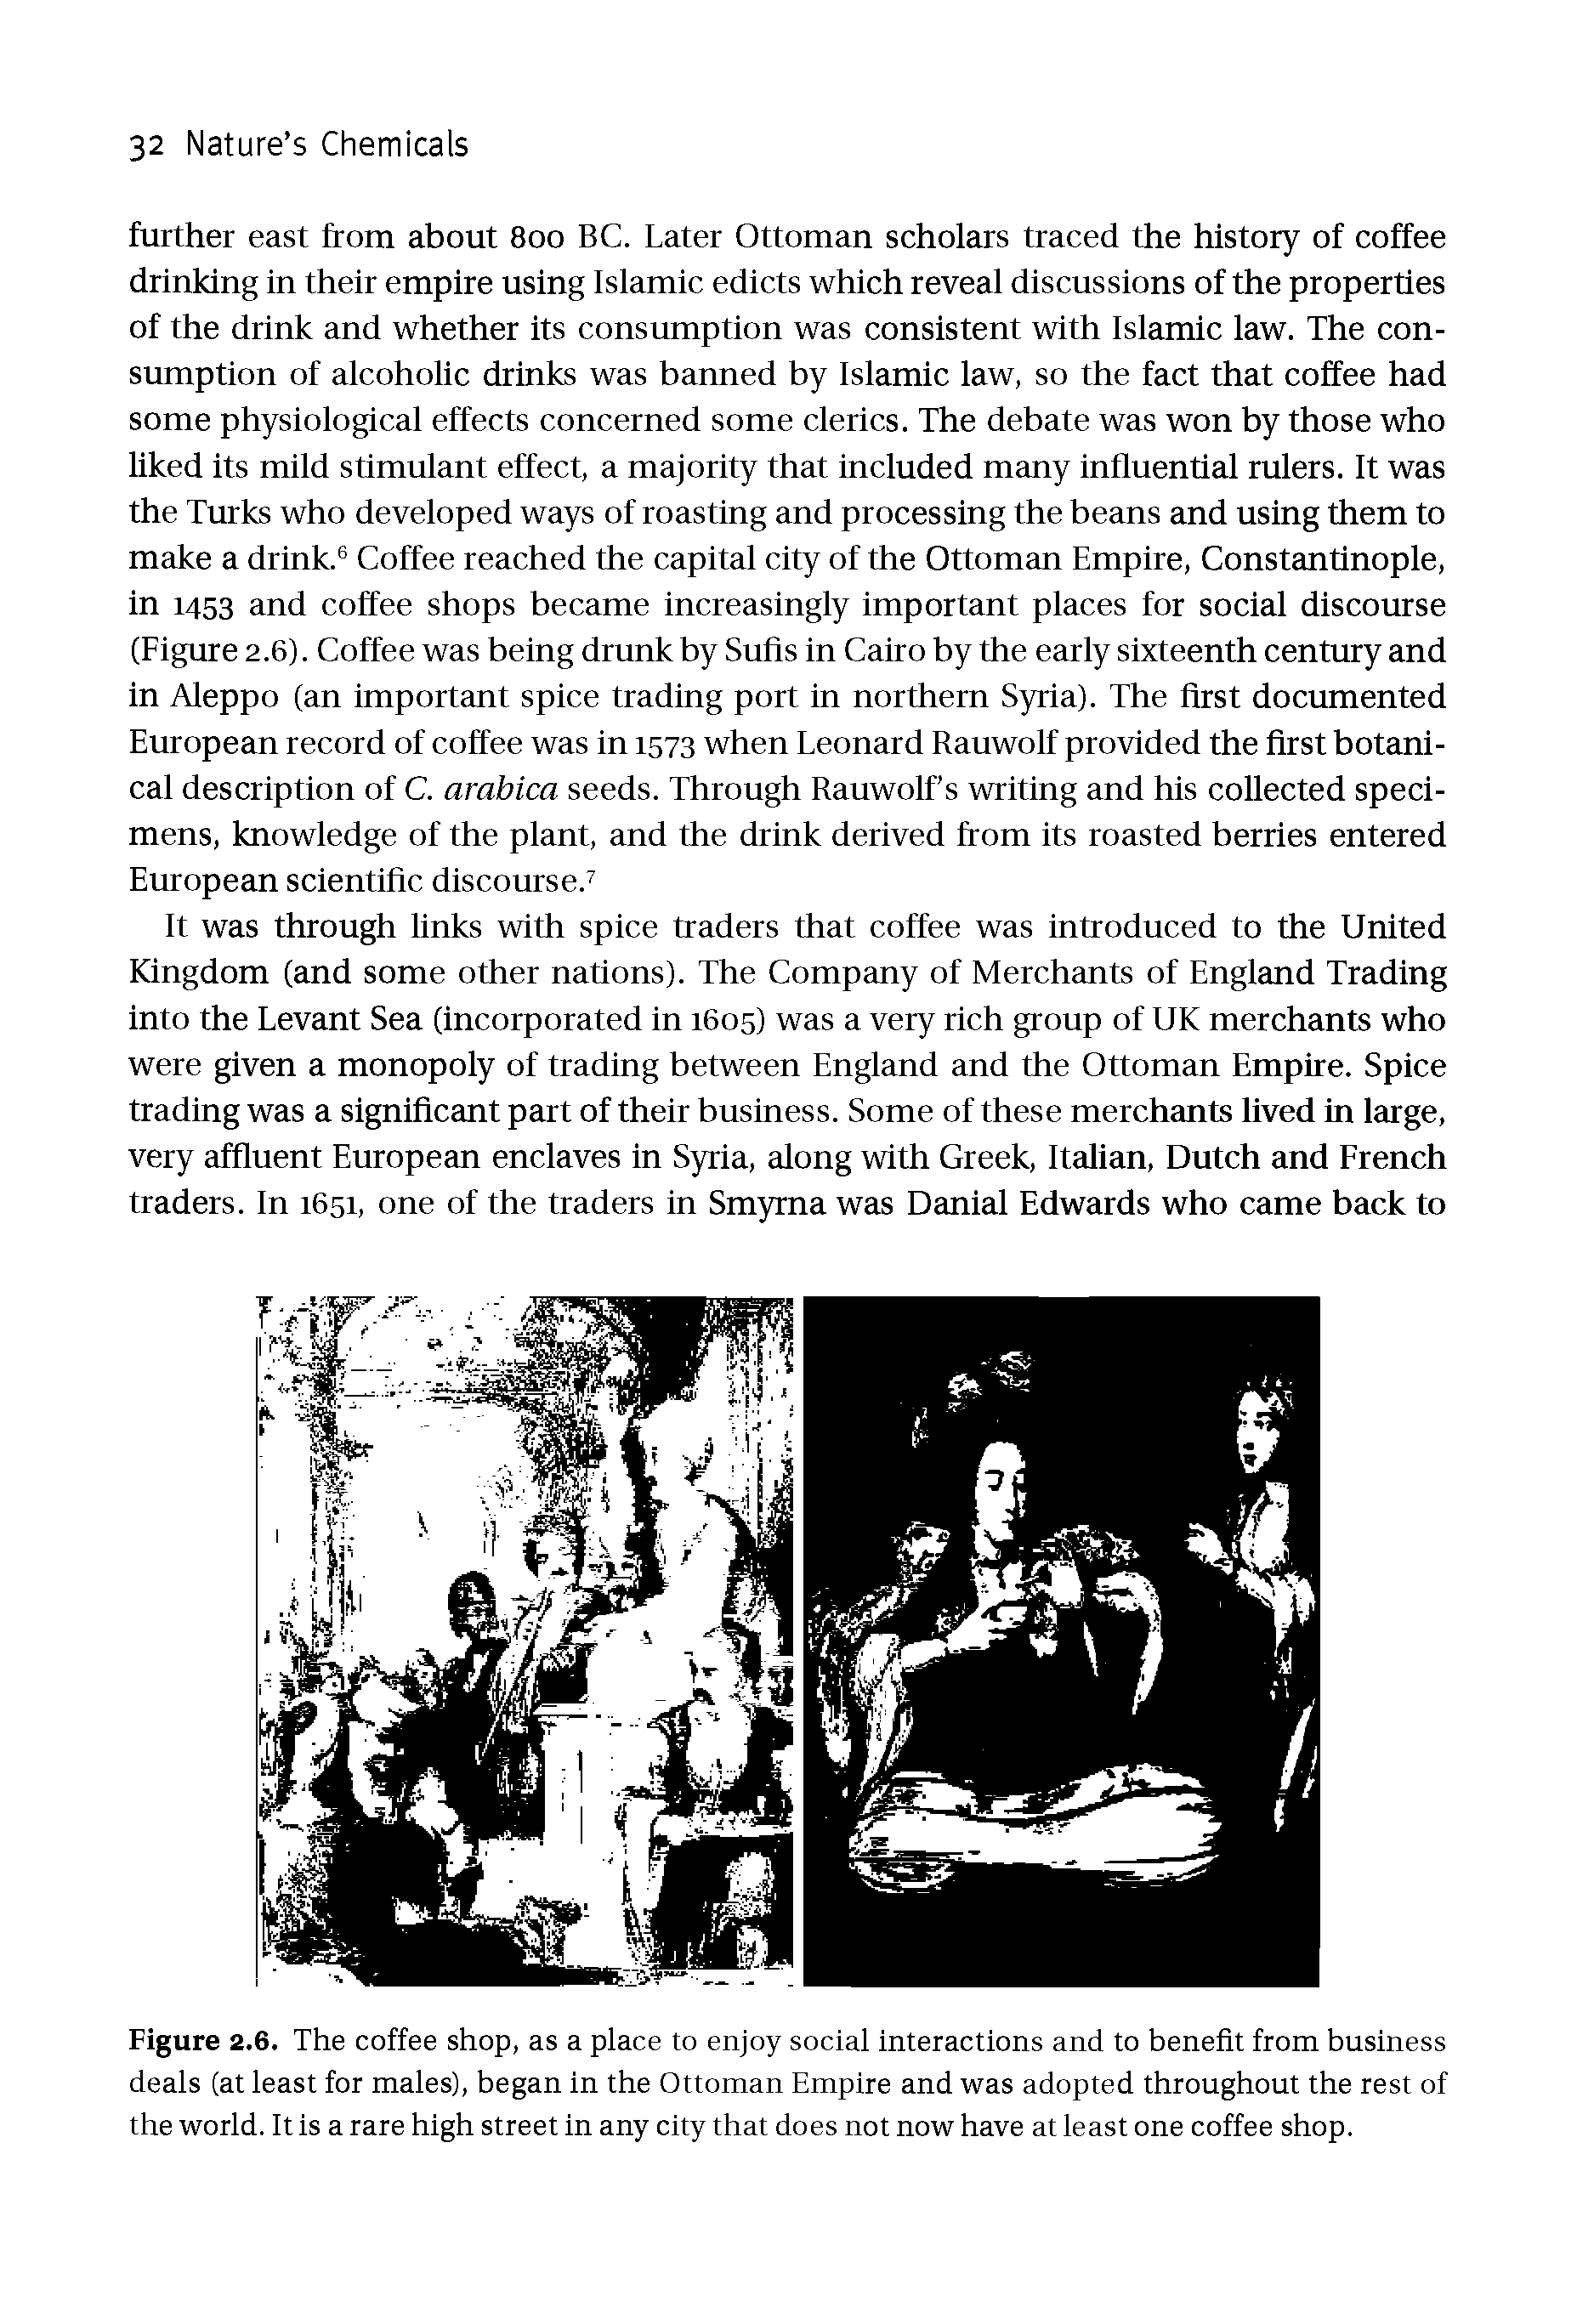 Figure 2.6. The coffee shop, as a place to enjoy social interactions and to benefit from business deals (at least for males), began in the Ottoman Empire and was adopted throughout the rest of the world. It is a rare high street in any city that does not now have at least one coffee shop.